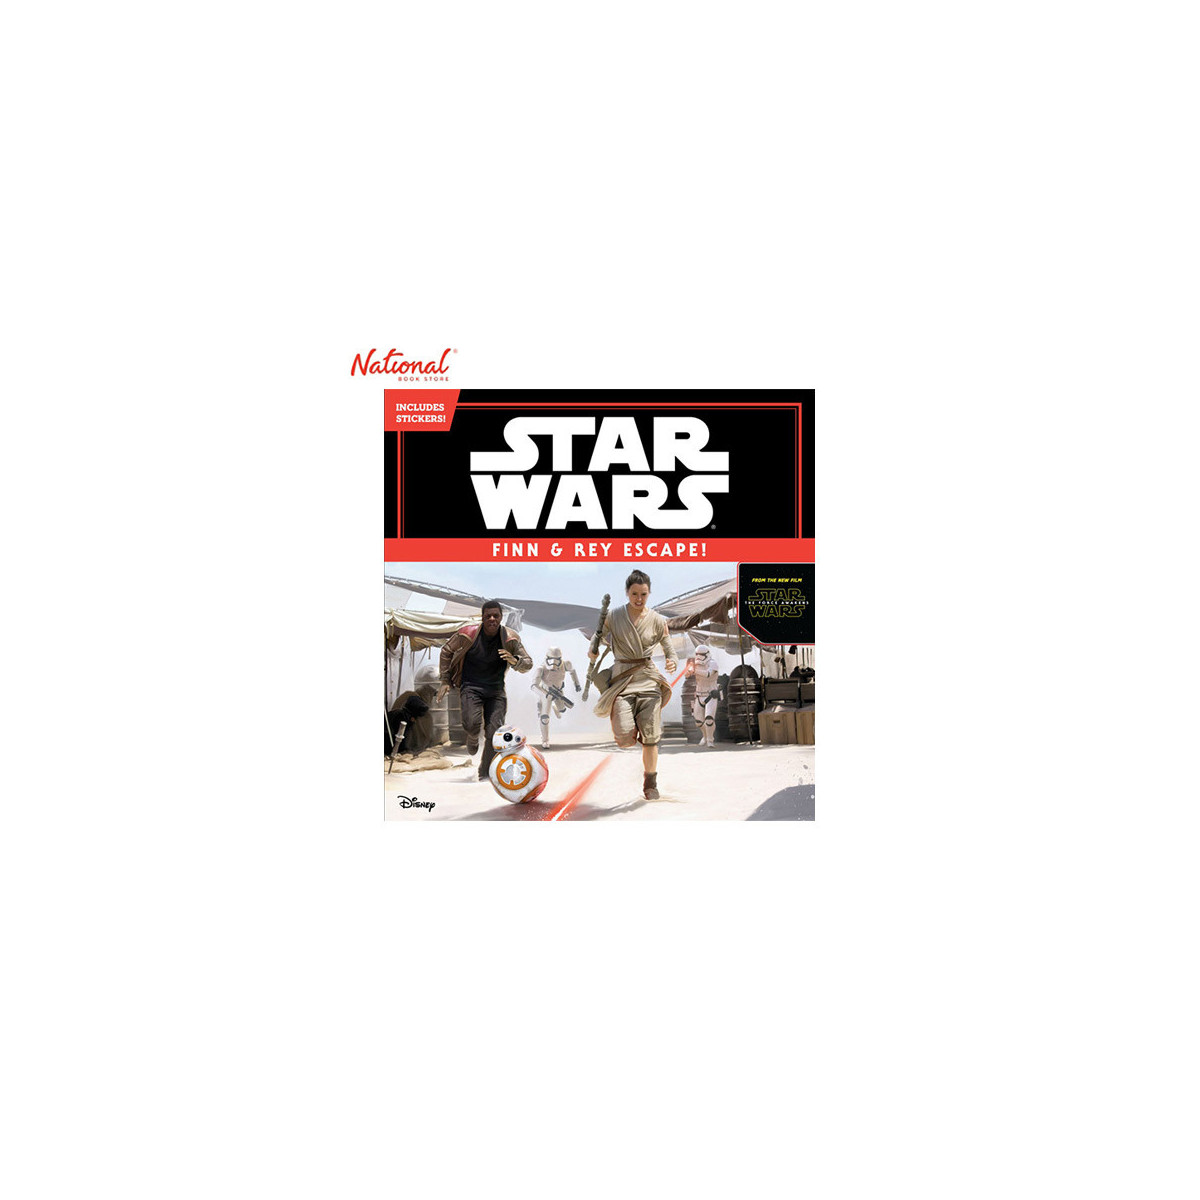 STAR WARS THE FORCE AWAKENS FINN  REY ESCAPE INCLUDES STICKERS